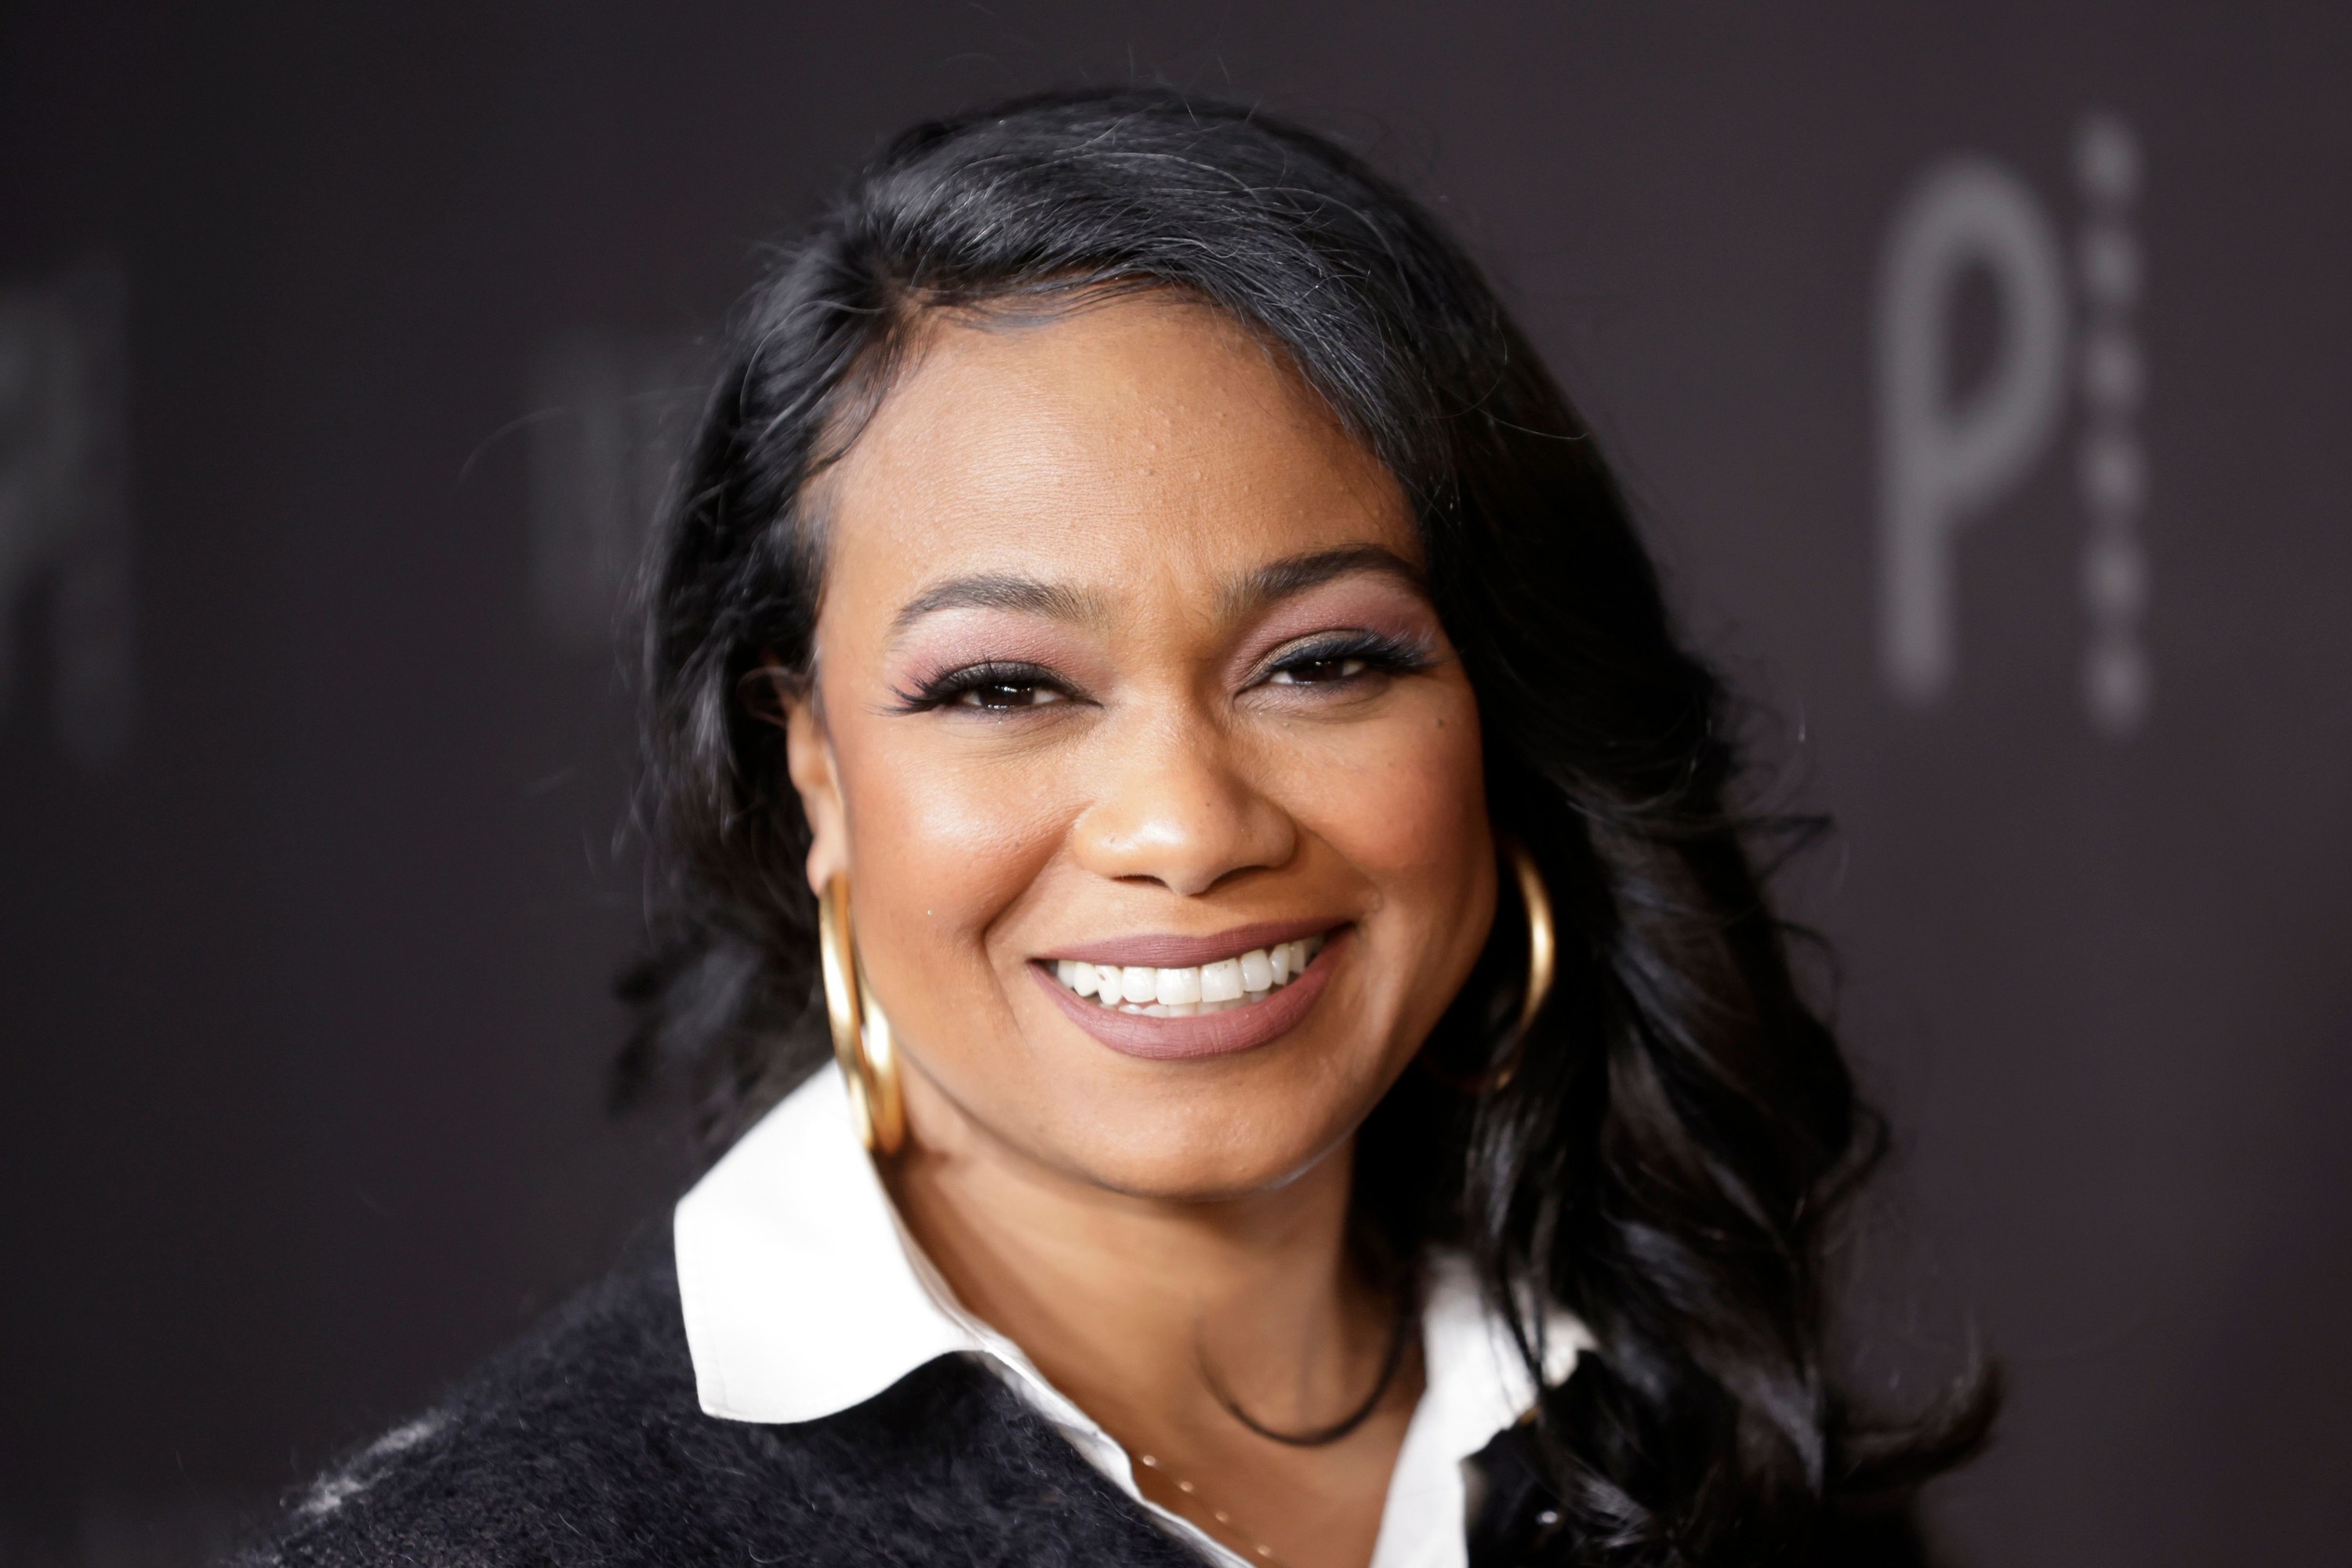 Tatyana Ali at a red carpet event